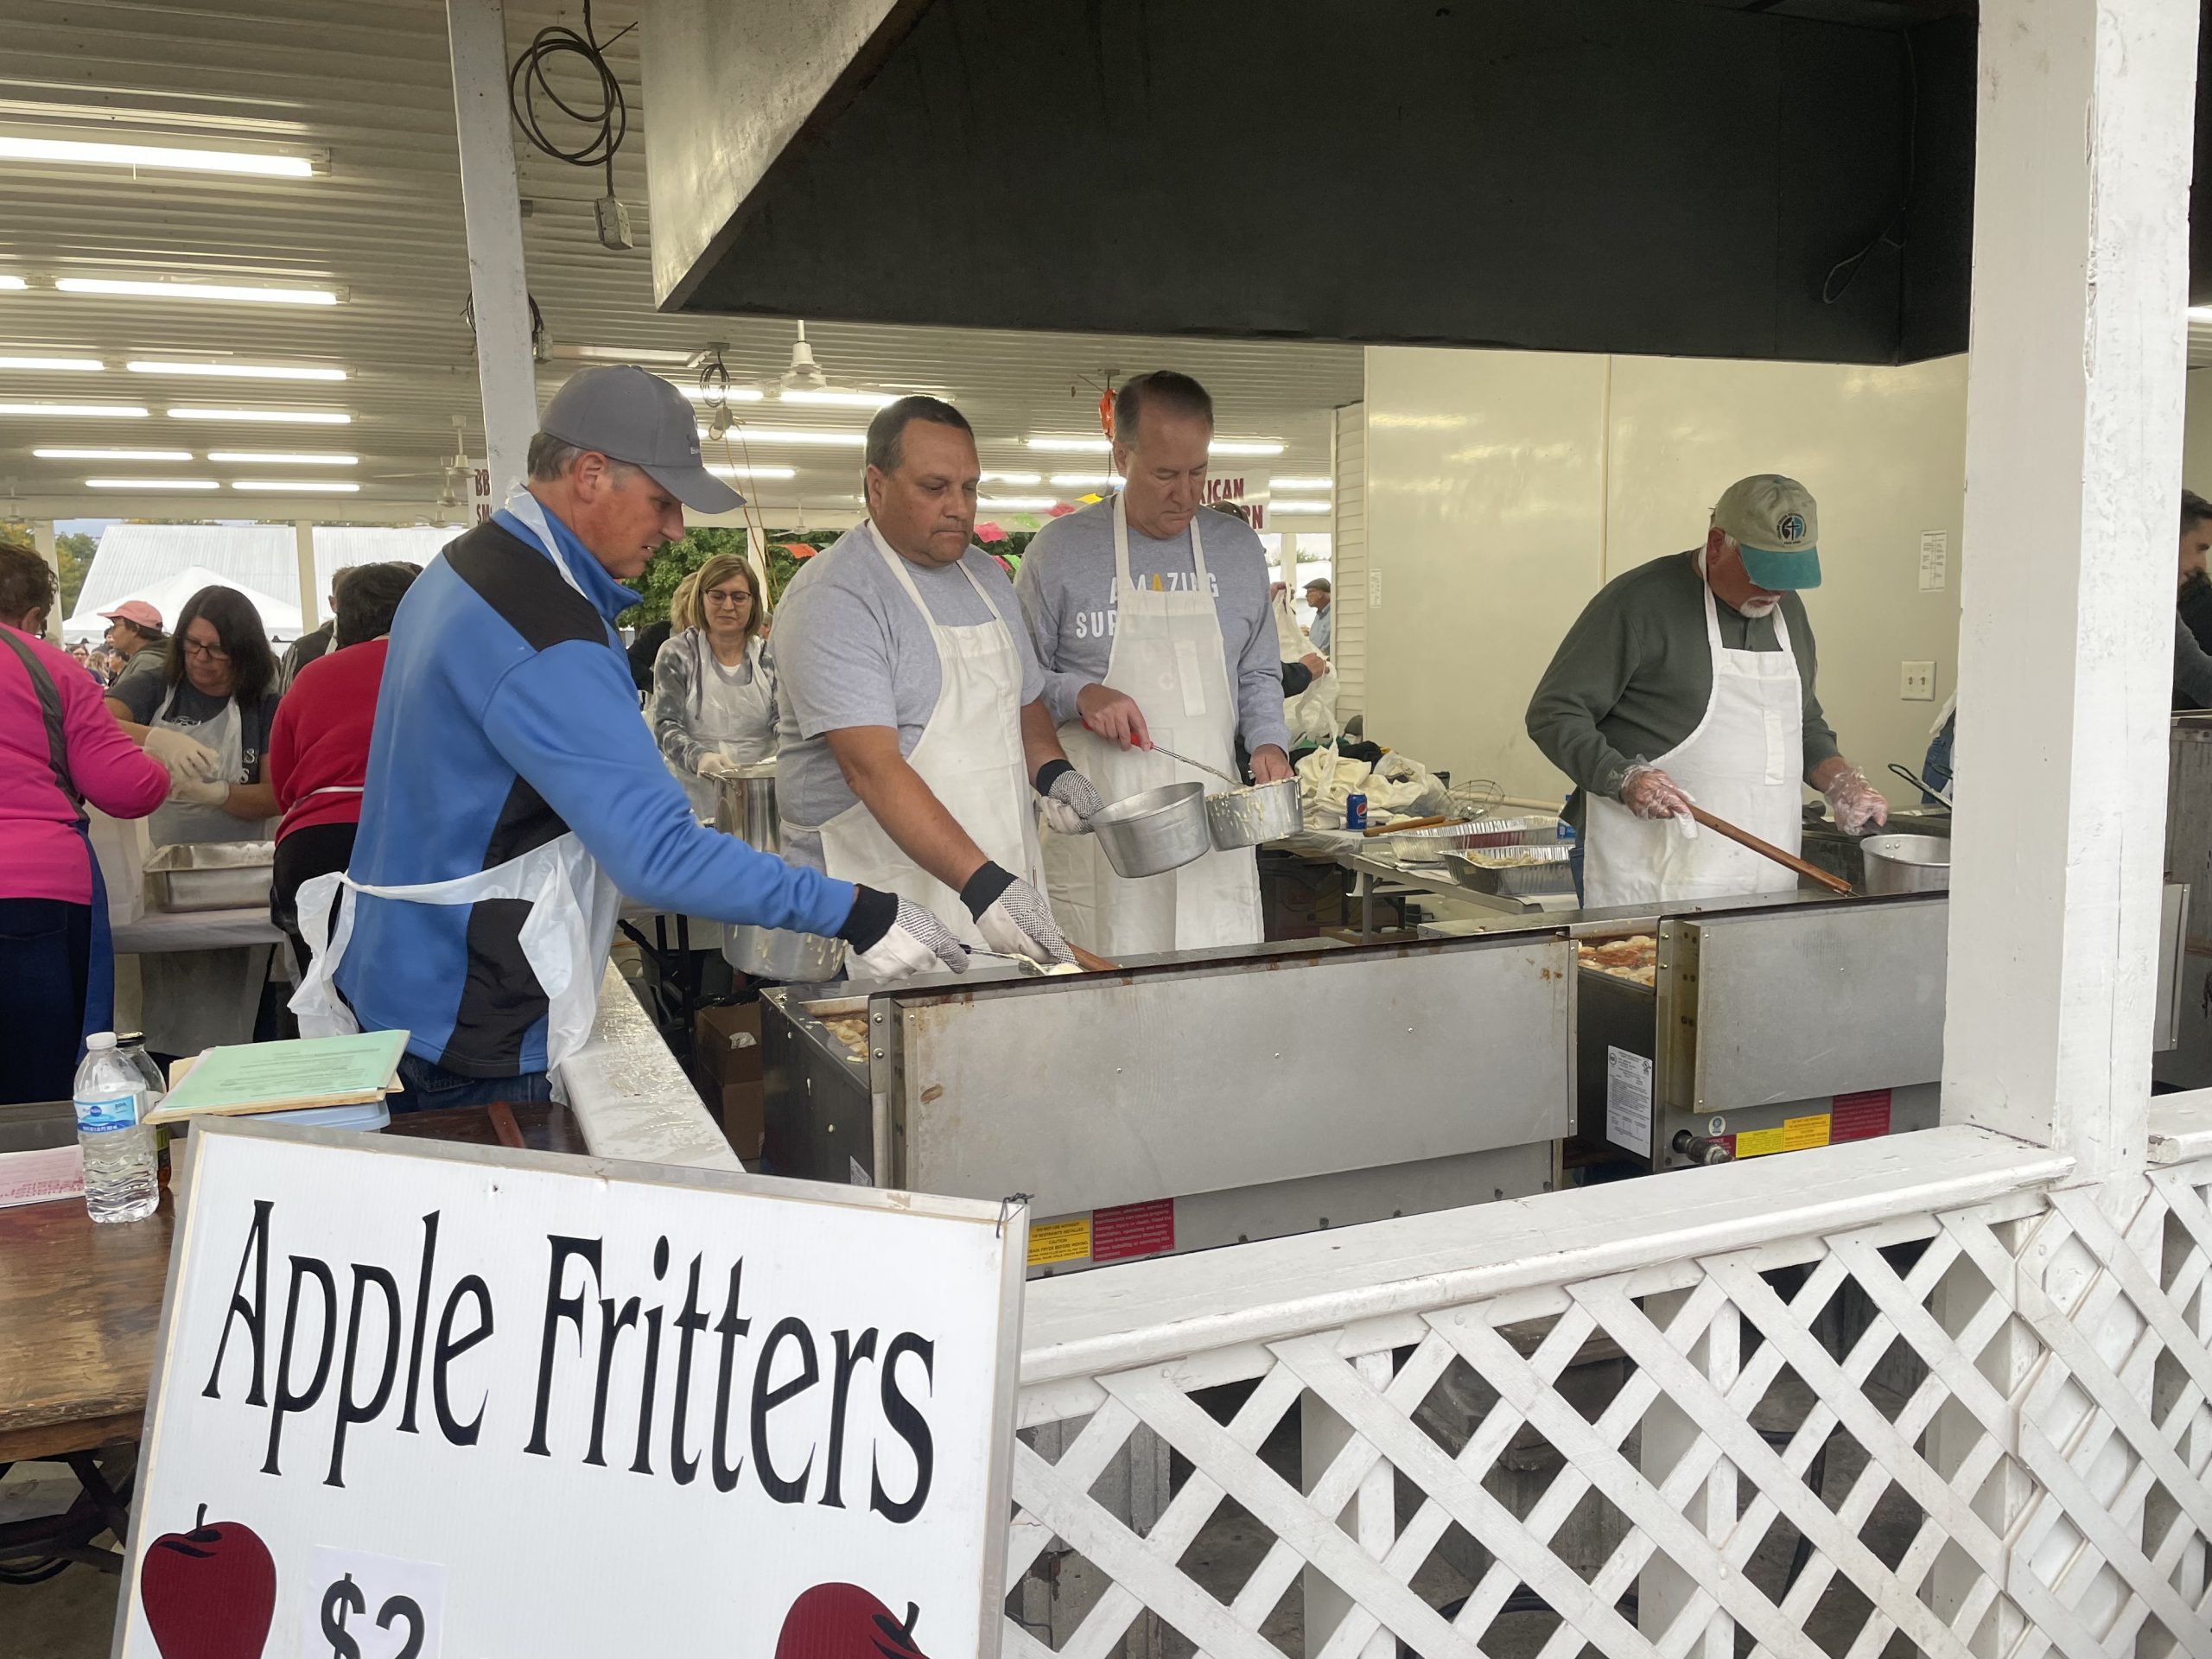 Members of Yellow Creek church stand over a deep fryer